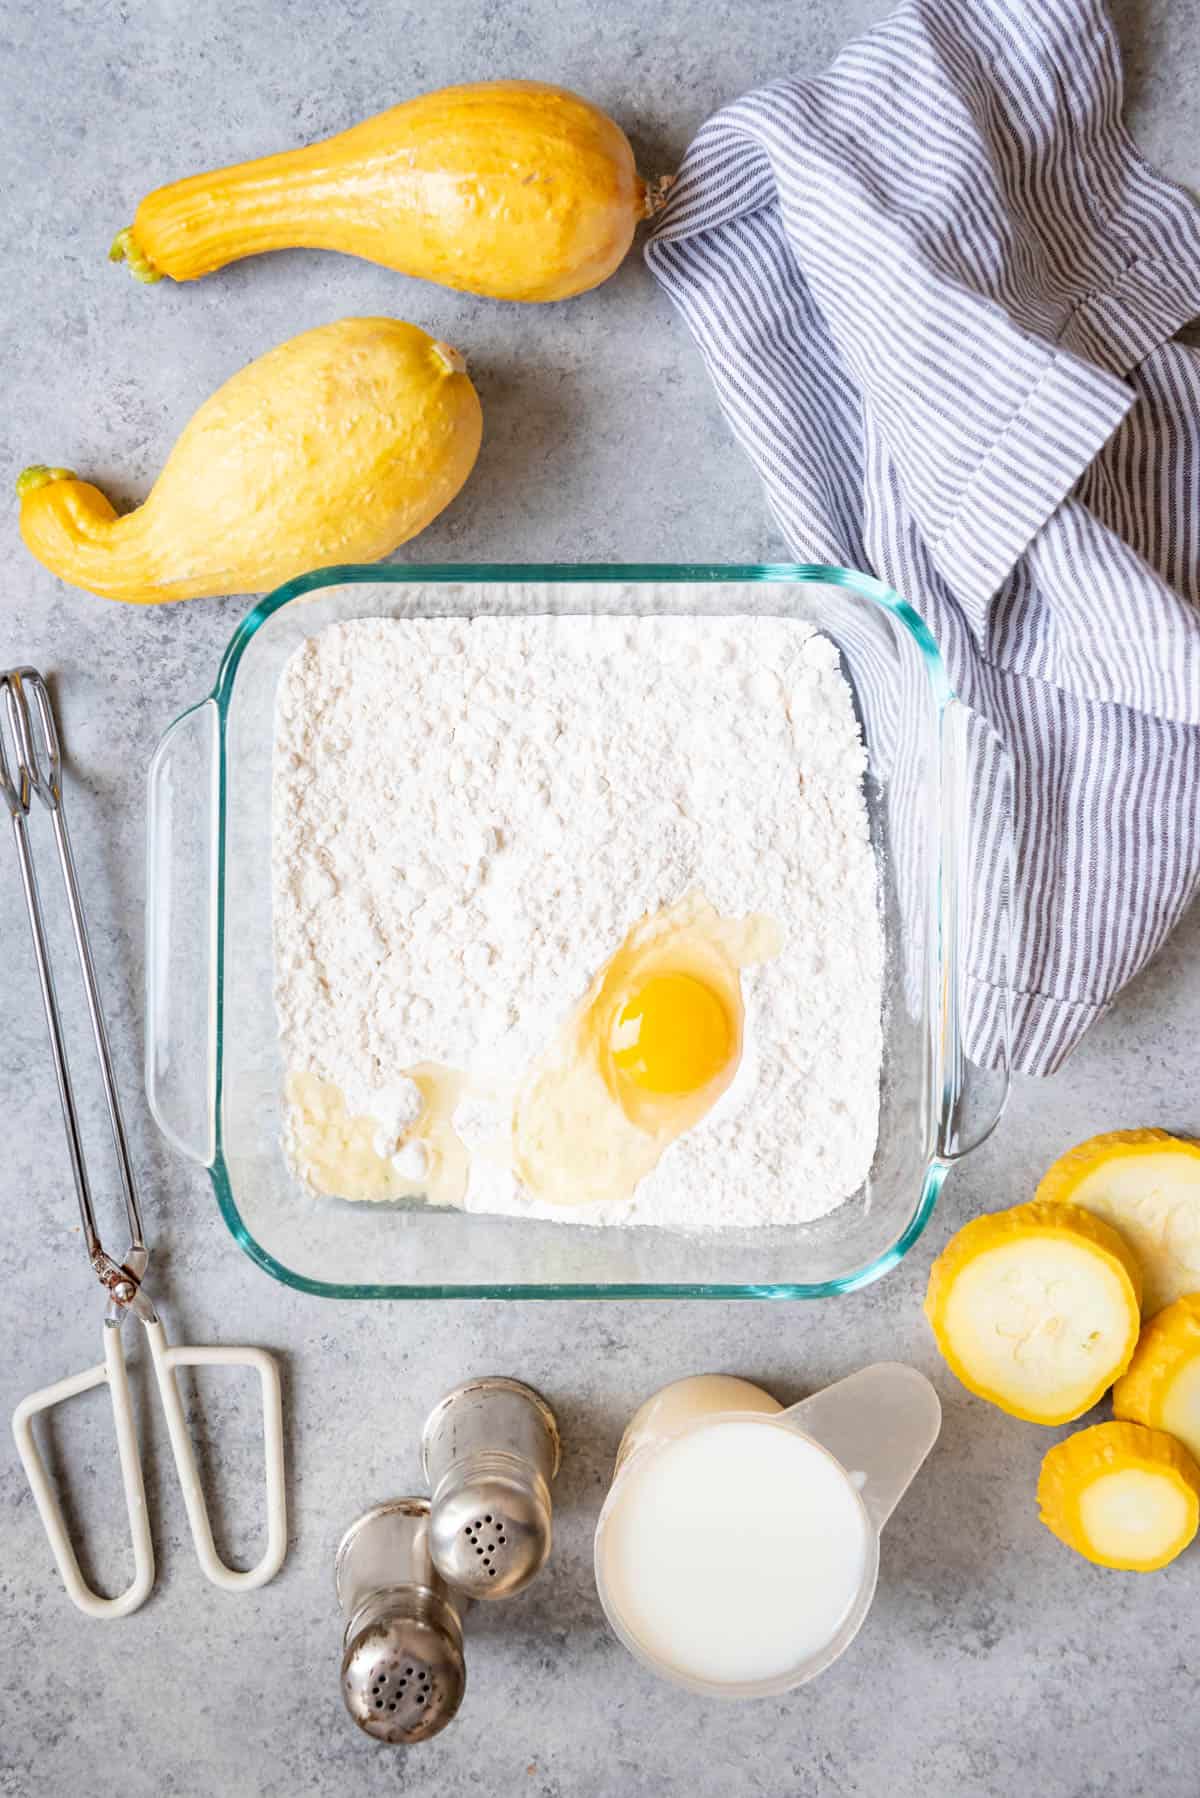 An image of egg in flour mixture in baking dish sourrounded by other ingredients and tools needed.